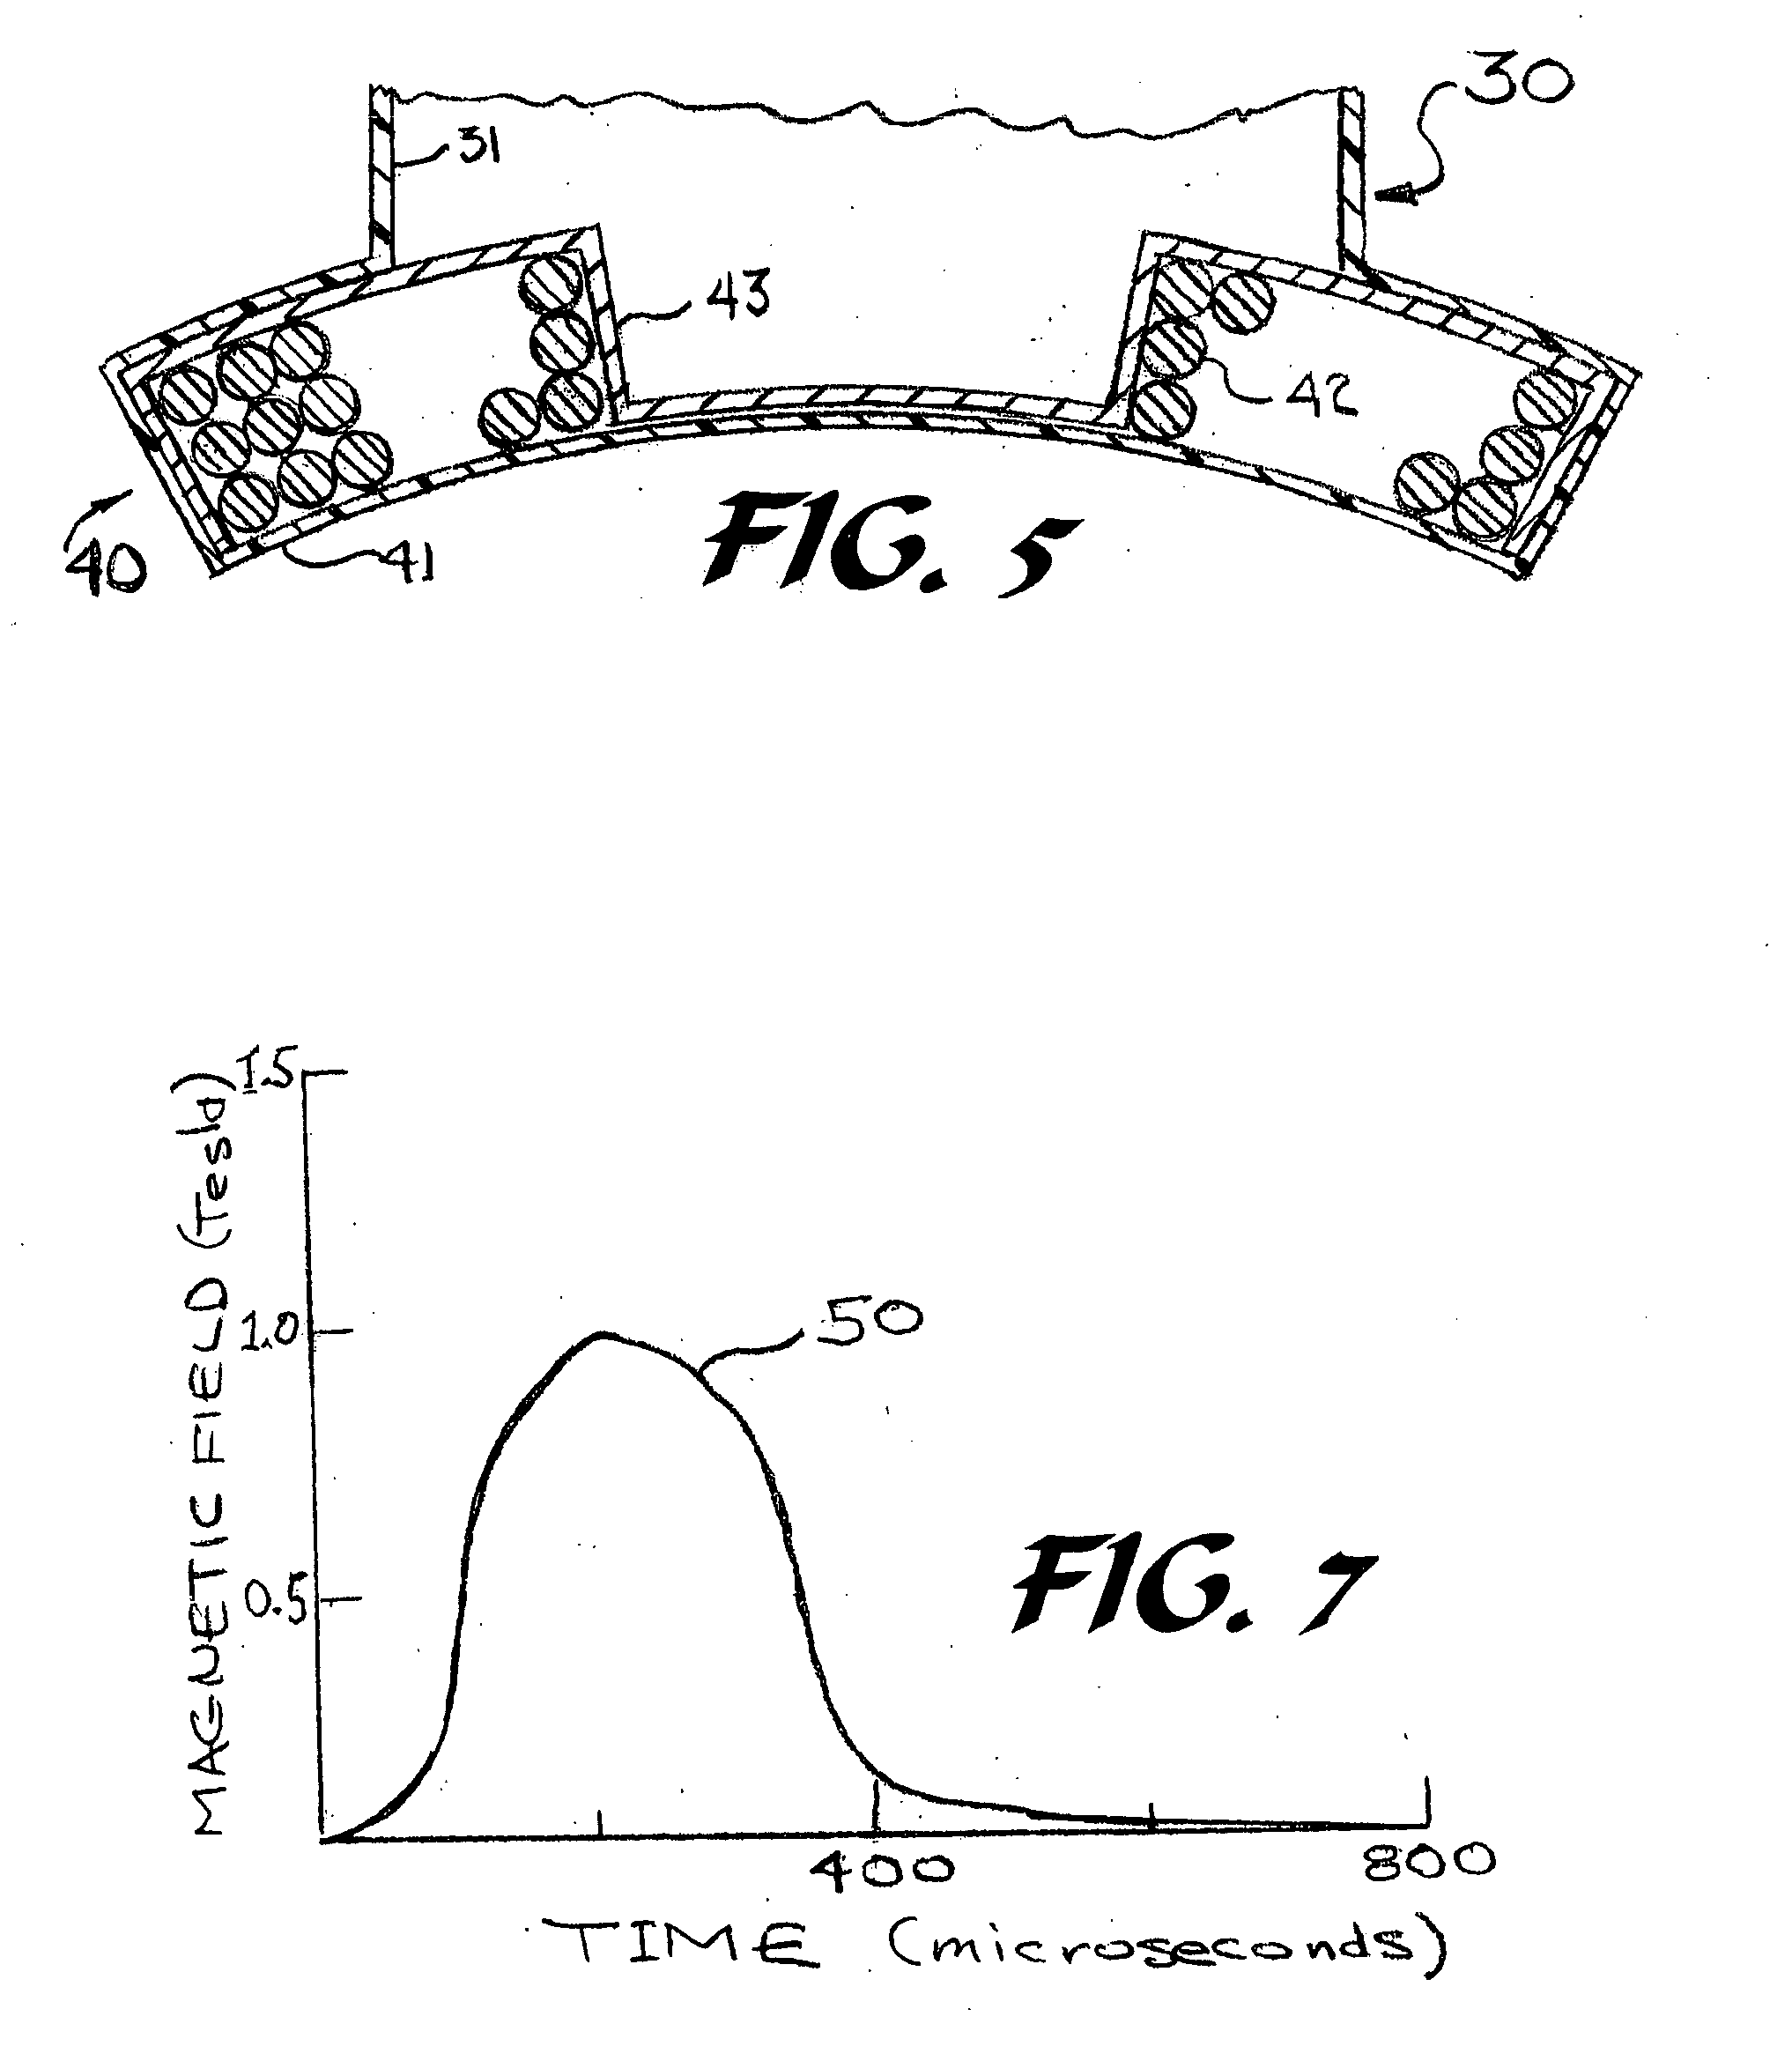 Magnetic pulsing system for inducing electric currents in a human body